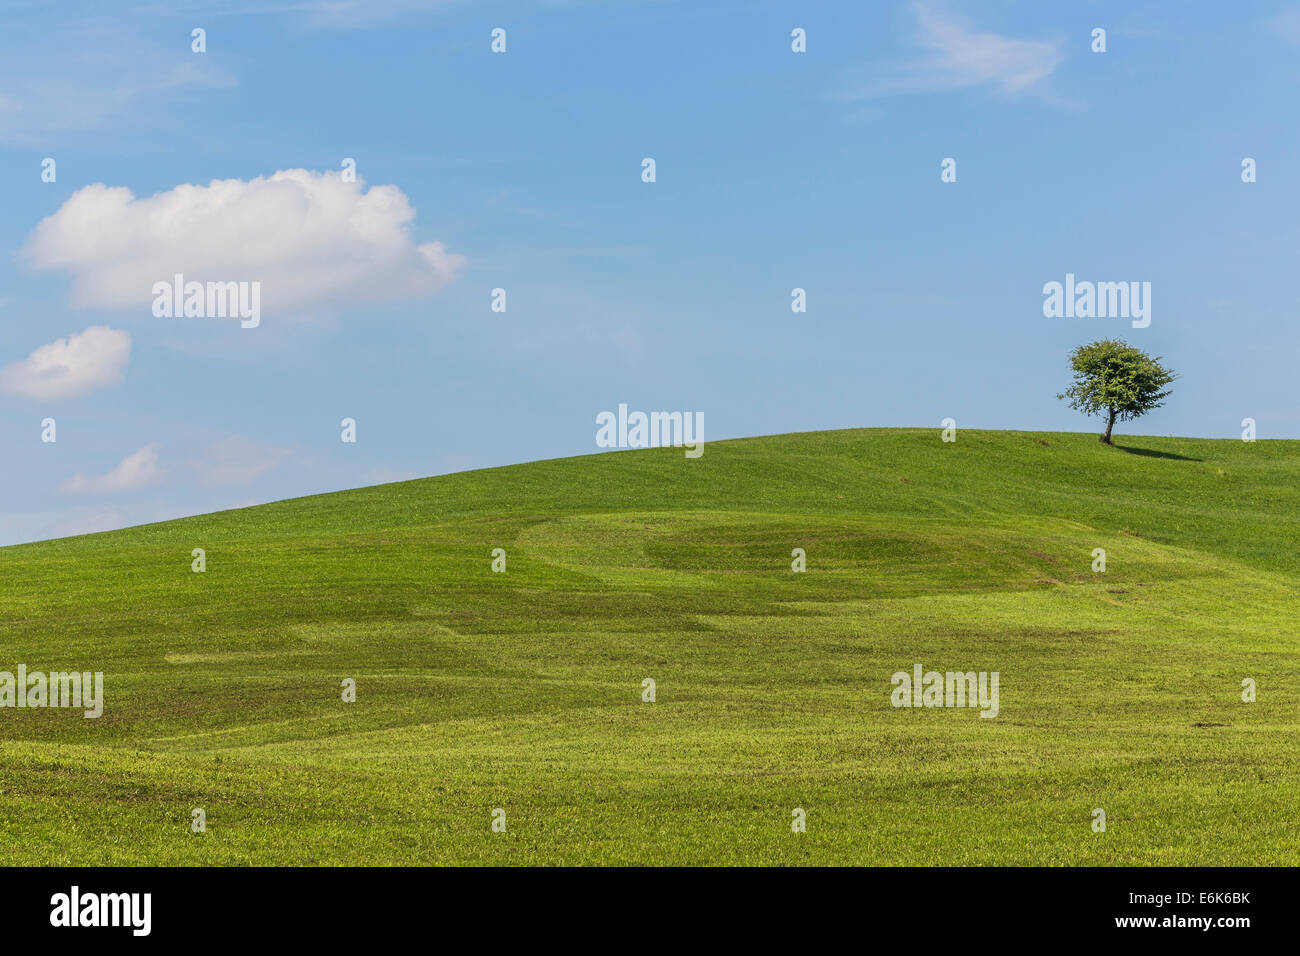 Meadow with solitary tree, cultural landscape, in Buching, Halblech, Allgäu, Bavaria, Germany Stock Photo